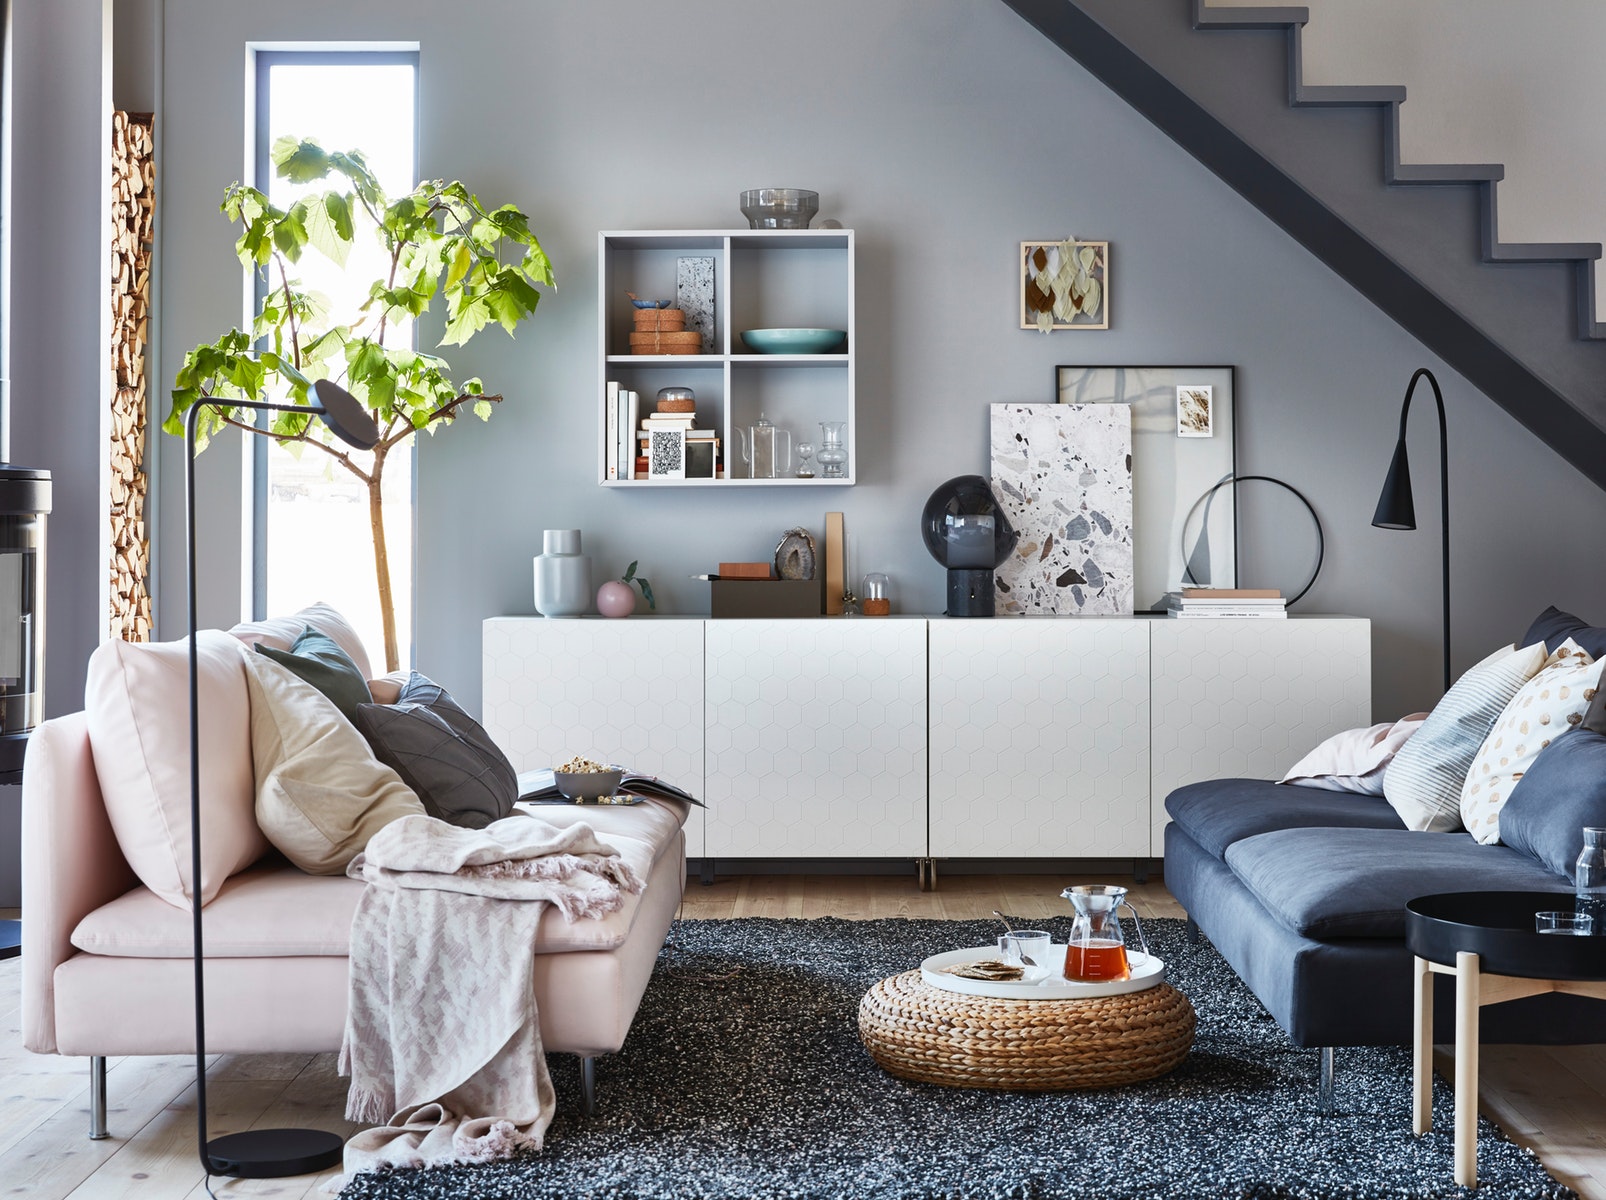 Modern living room with gray walls and light wood flooring. Features a dark gray sofa, light pink loveseat, potted plant, wall-mounted shelves with decor, white sideboard, and a black floor lamp. A woven ottoman and soft furnishings complete the cozy setup.